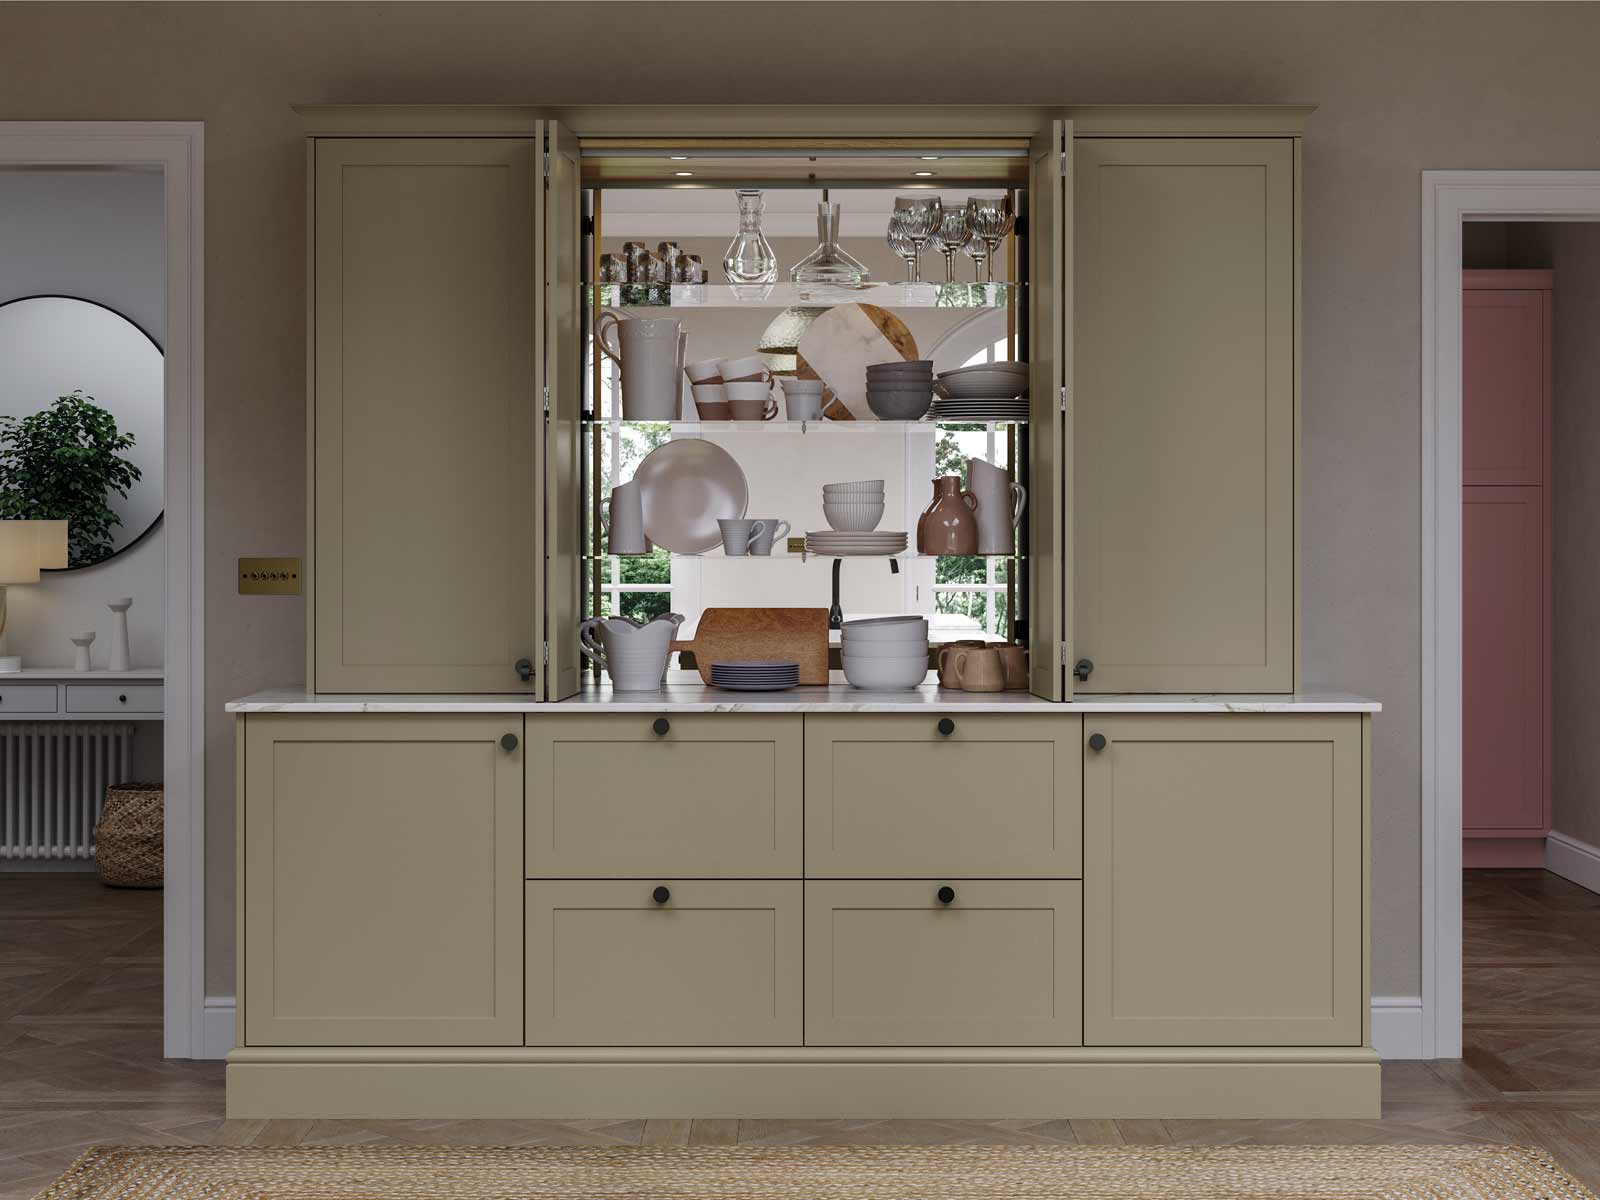 A light green Display Dresser with mirrored shelves and white marble worktop